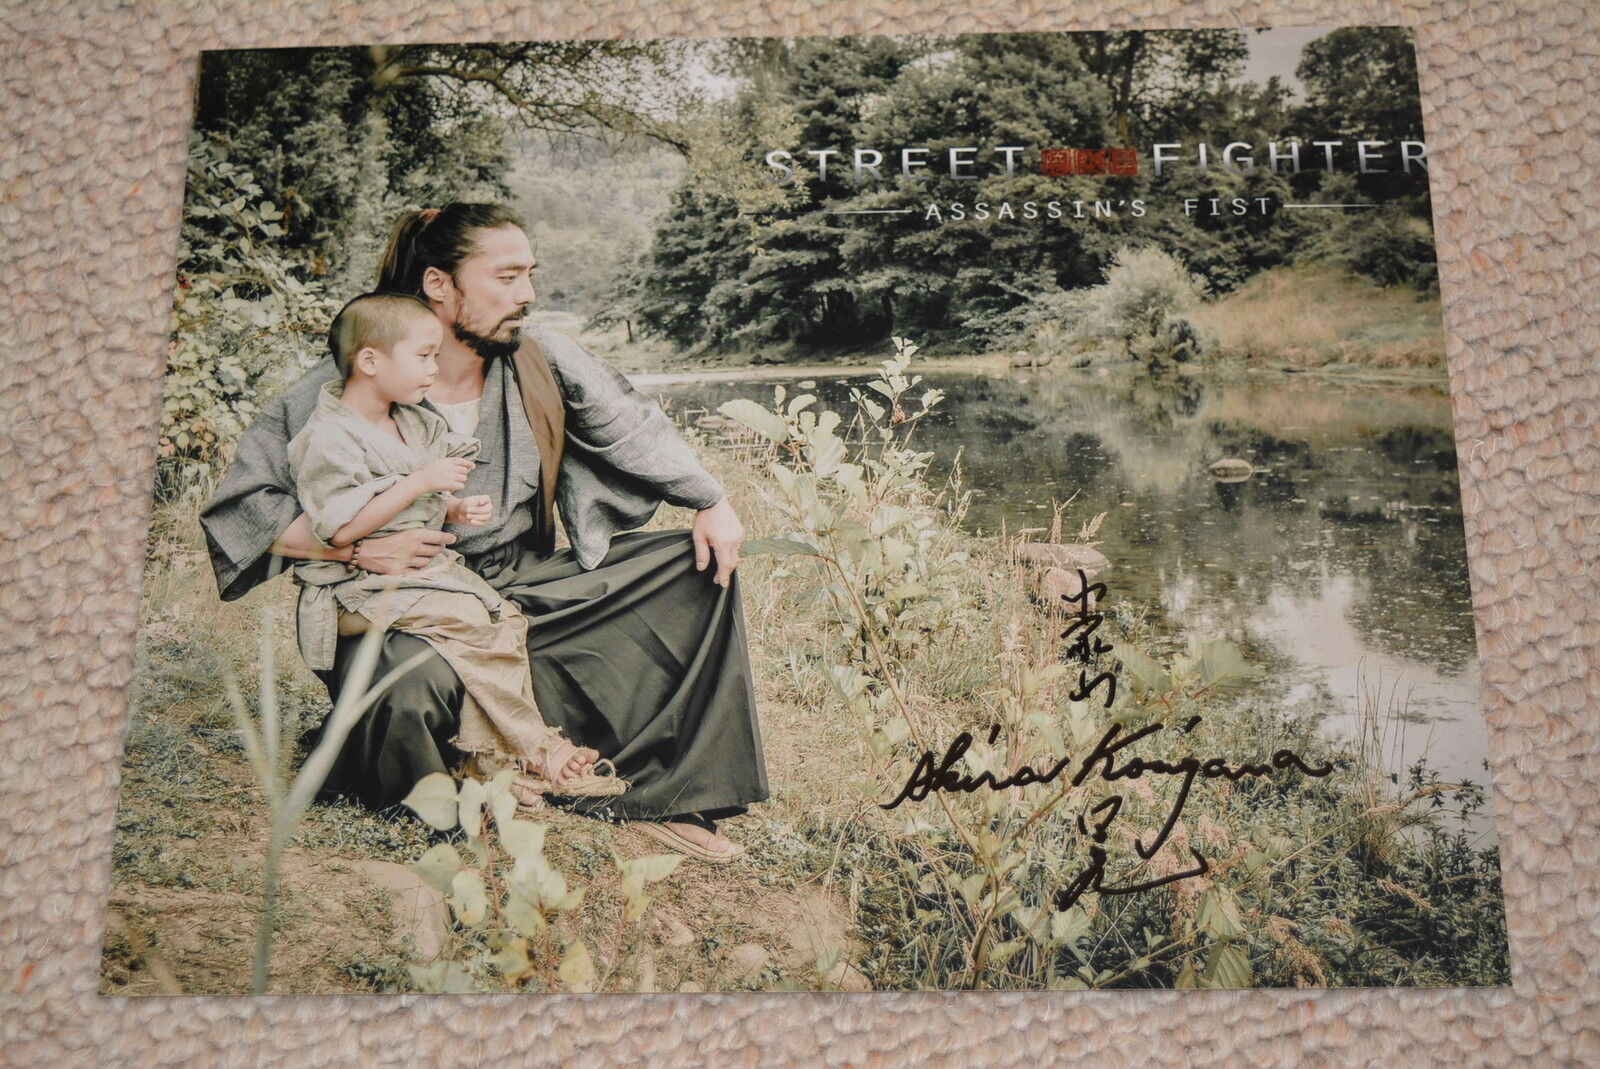 AKIRA KOIEYAMA signed autograph In Person 8x10 Japanese actor STREET FIGHTER